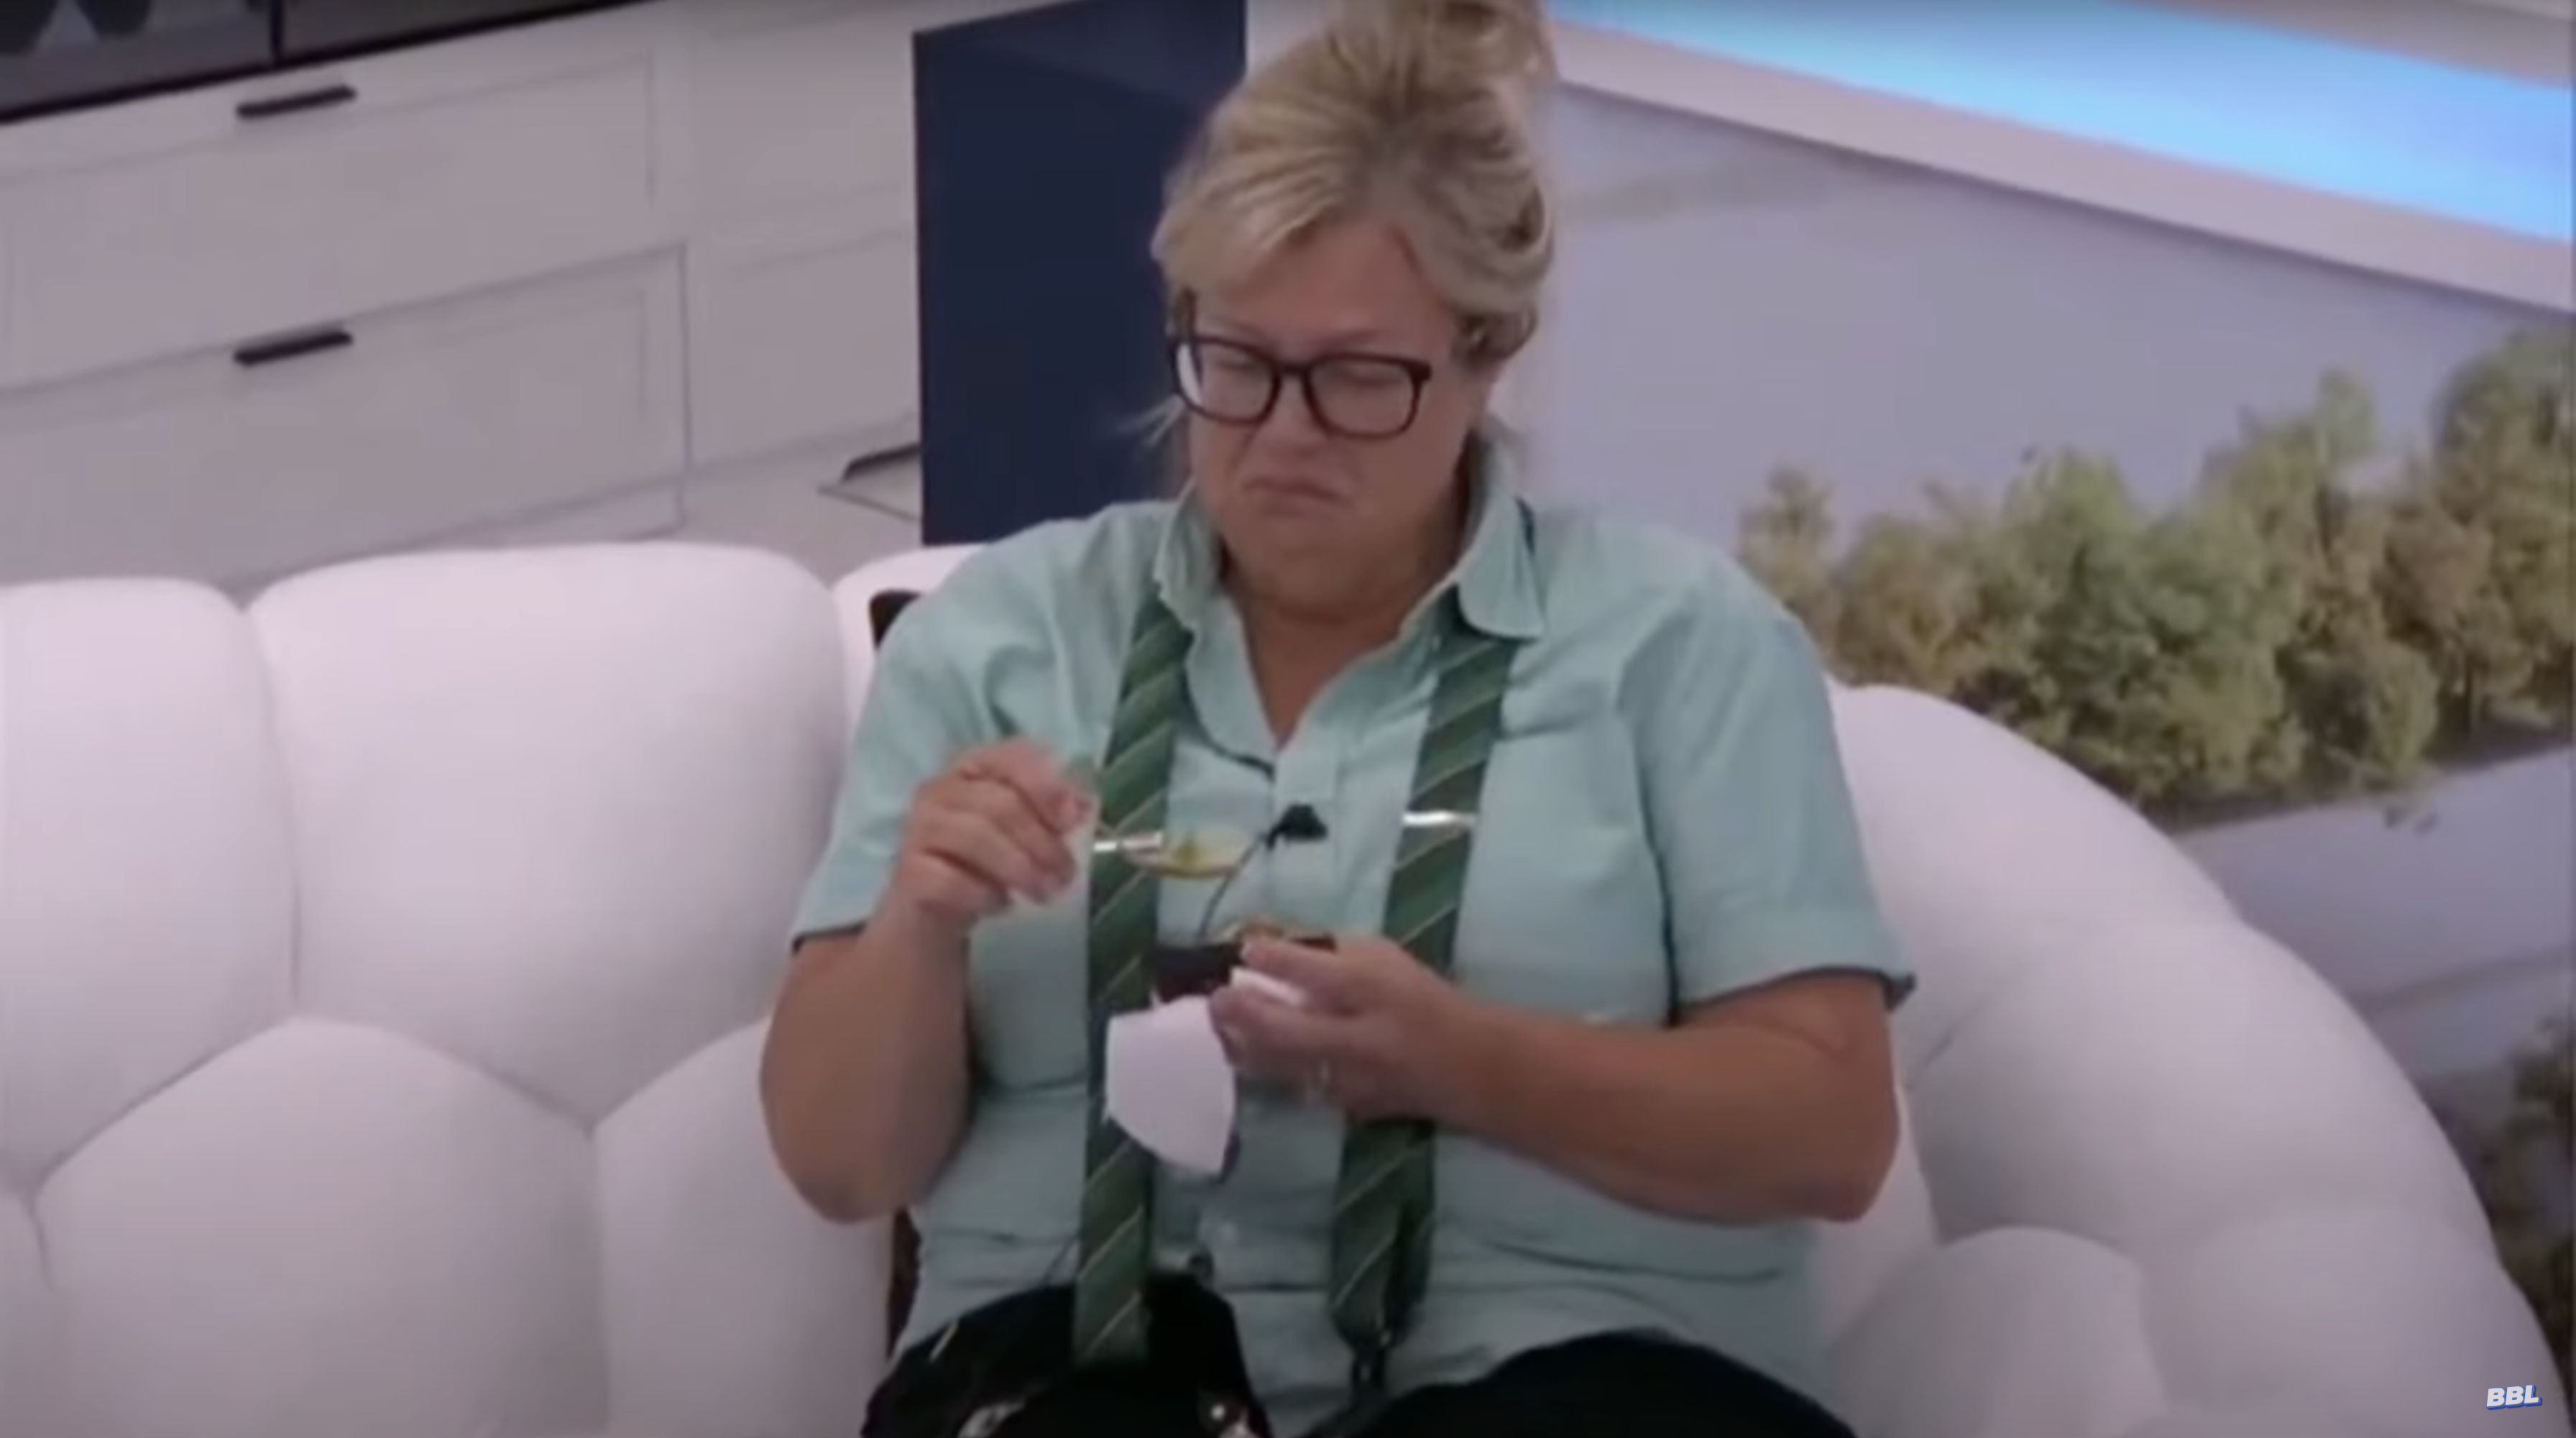 Big Brother viewers caught Angela Murray crying on the live feeds after learning she was up for eviction